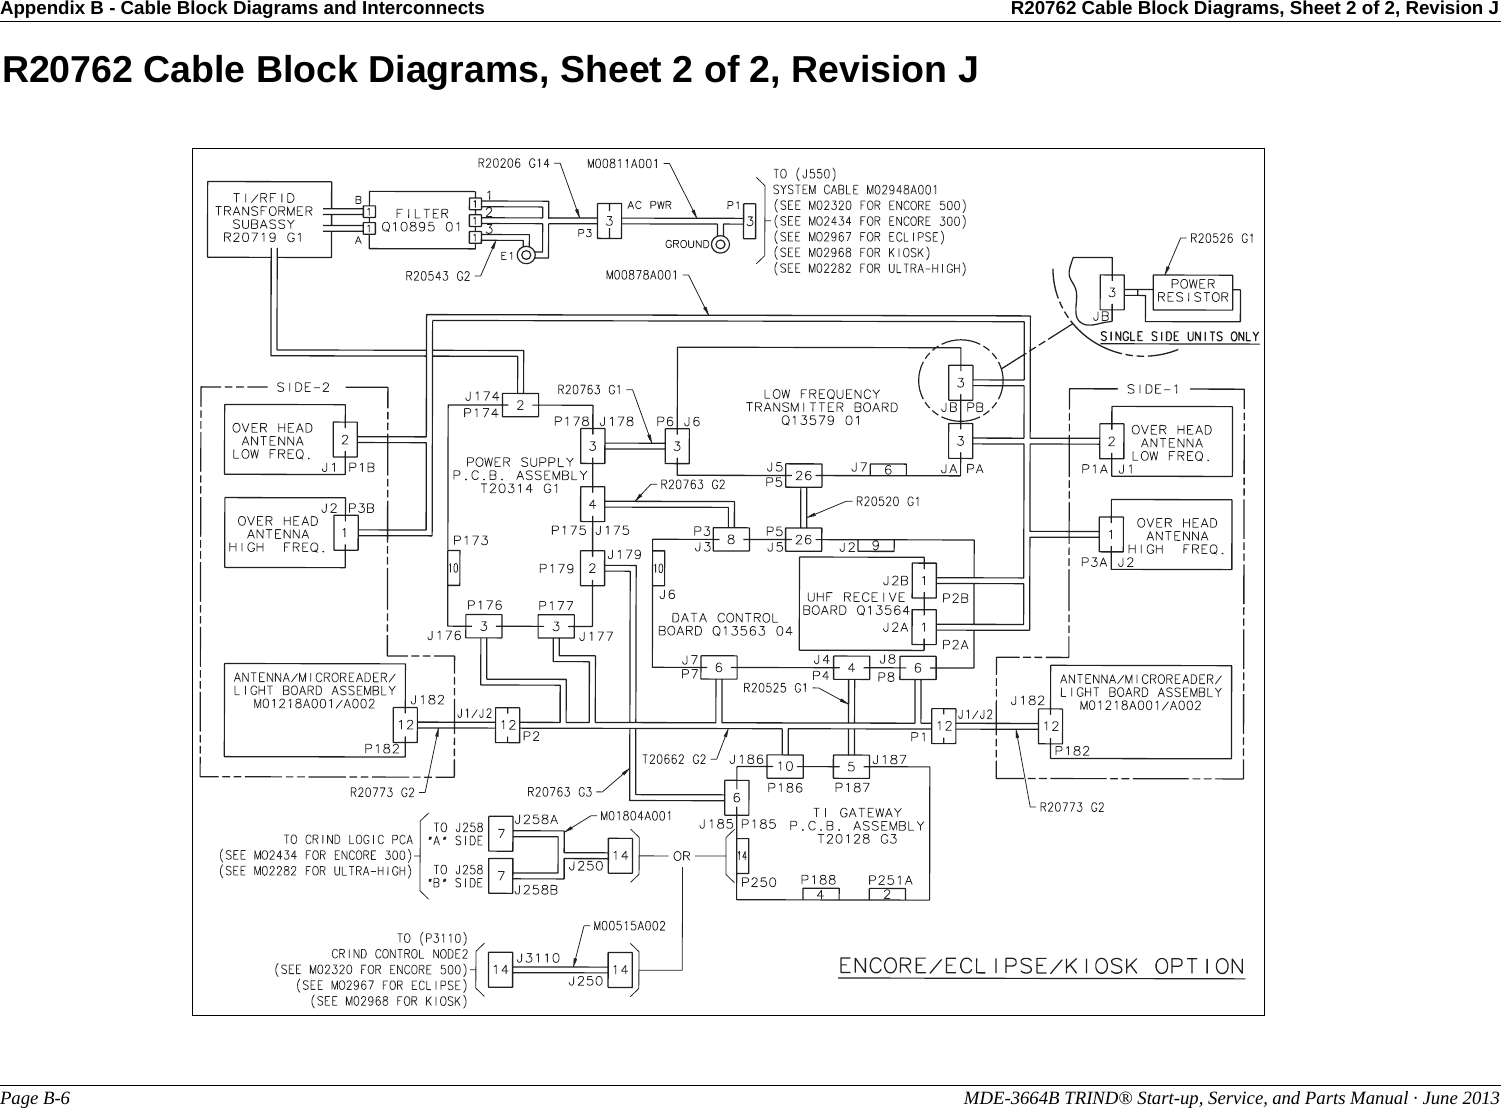 Appendix B - Cable Block Diagrams and Interconnects R20762 Cable Block Diagrams, Sheet 2 of 2, Revision JPage B-6                                                                                                               MDE-3664B TRIND® Start-up, Service, and Parts Manual · June 2013R20762 Cable Block Diagrams, Sheet 2 of 2, Revision J